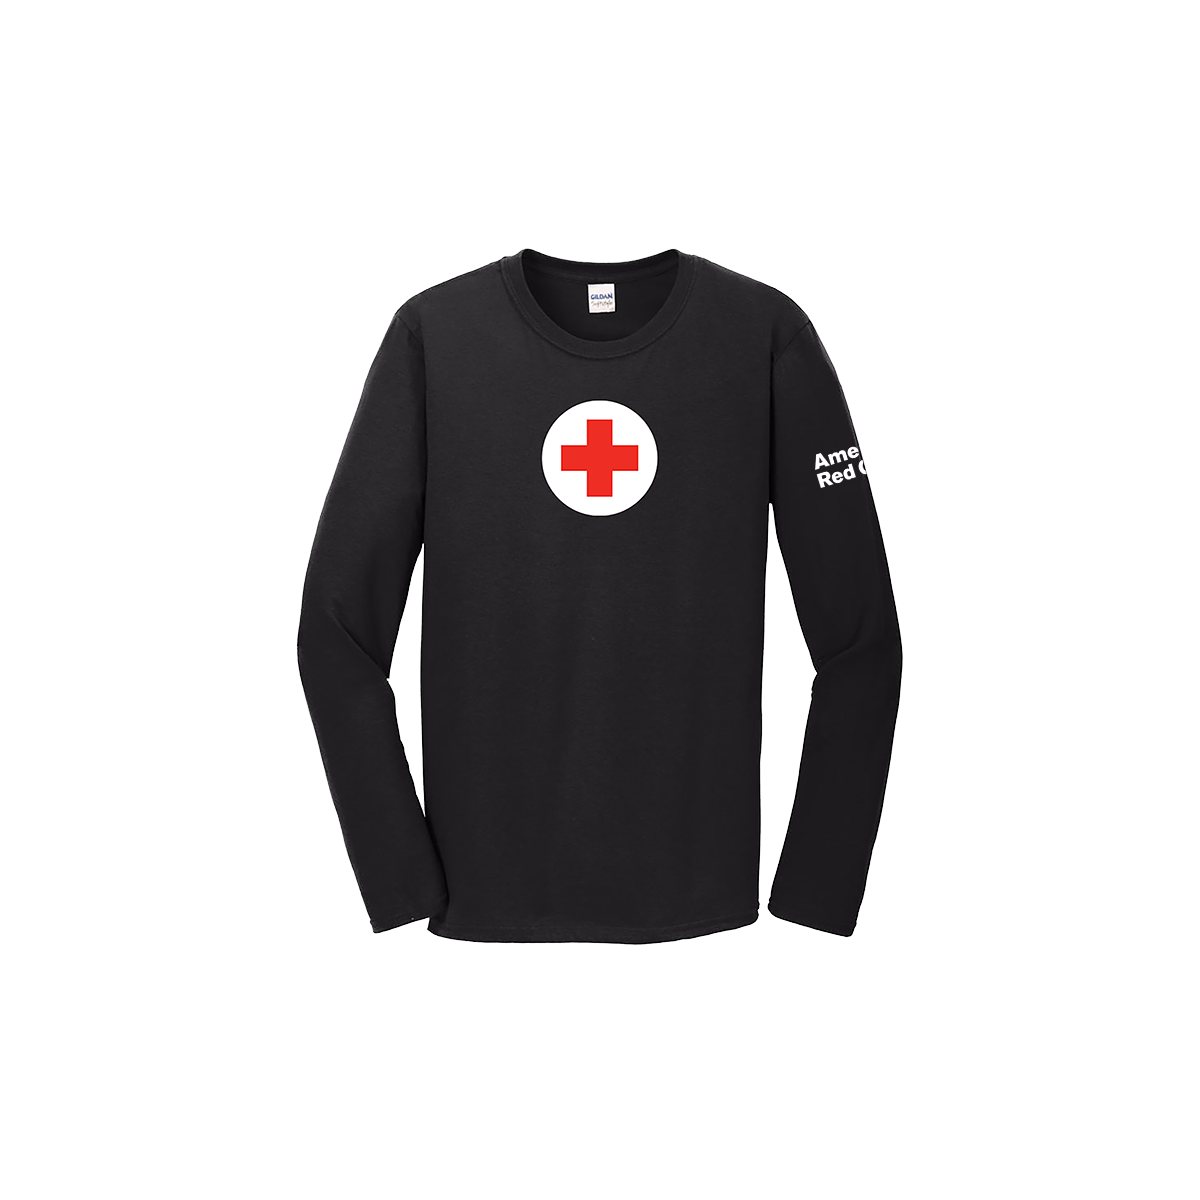 T and Red Cross Logo - Unisex Cotton Long Sleeve T Shirt With Logo. Red Cross Store